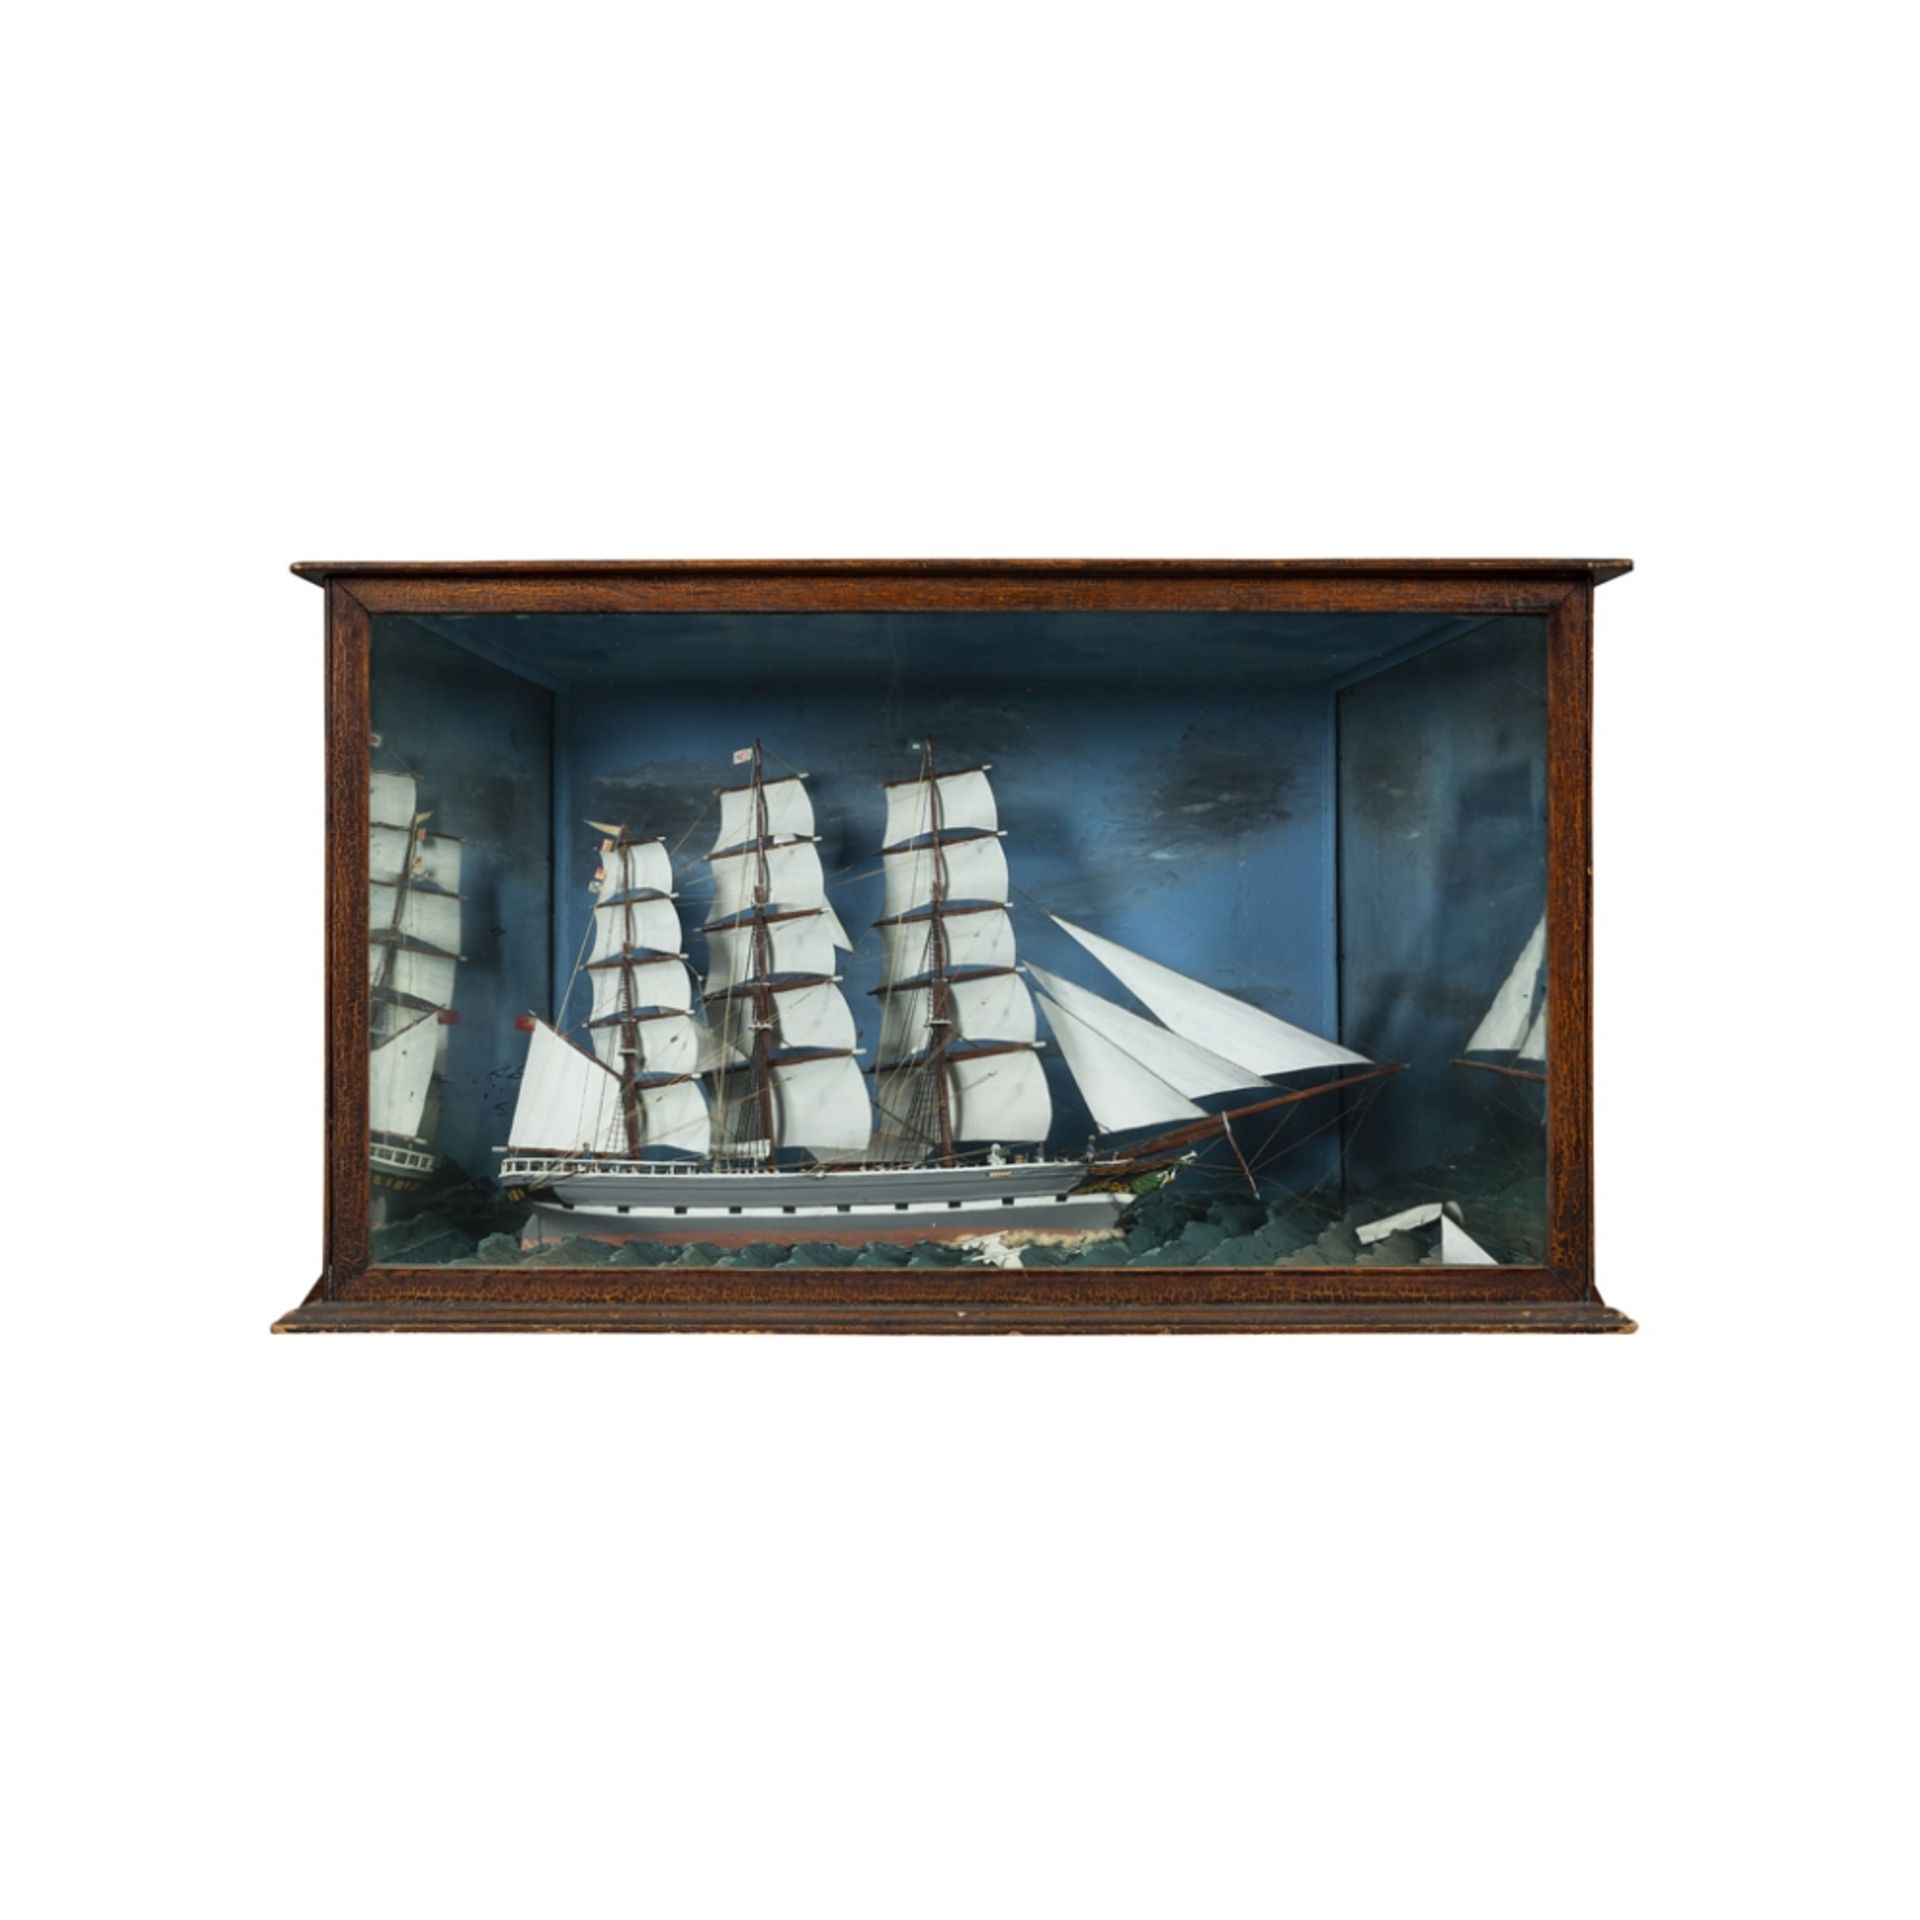 CASED MODEL OF THE SAILING SHIP 'BELLA'19TH CENTURY with three fully rigged masts, in a diorama case